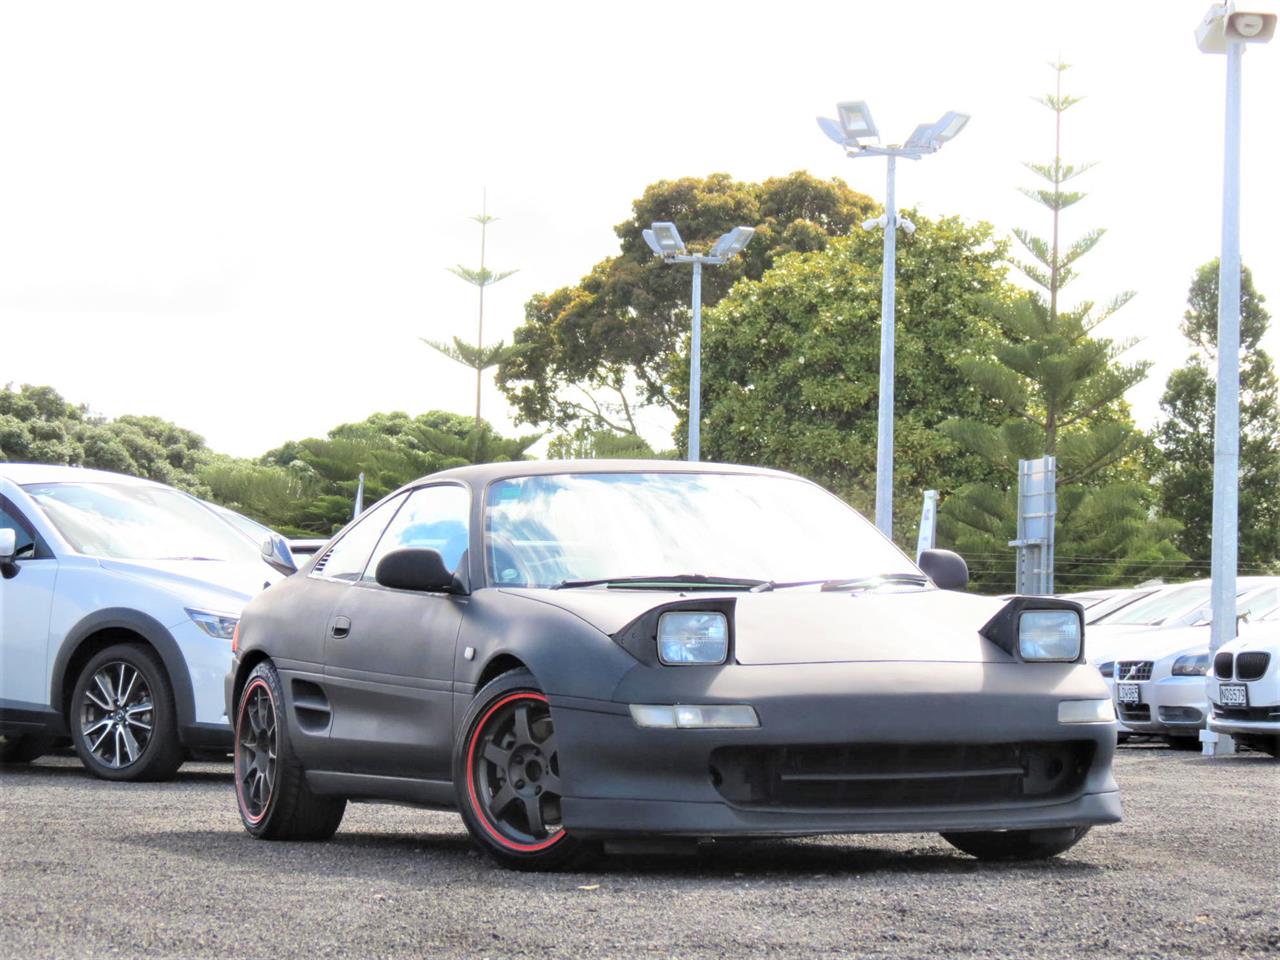 NZC 1997 Toyota MR2 just arrived to Auckland